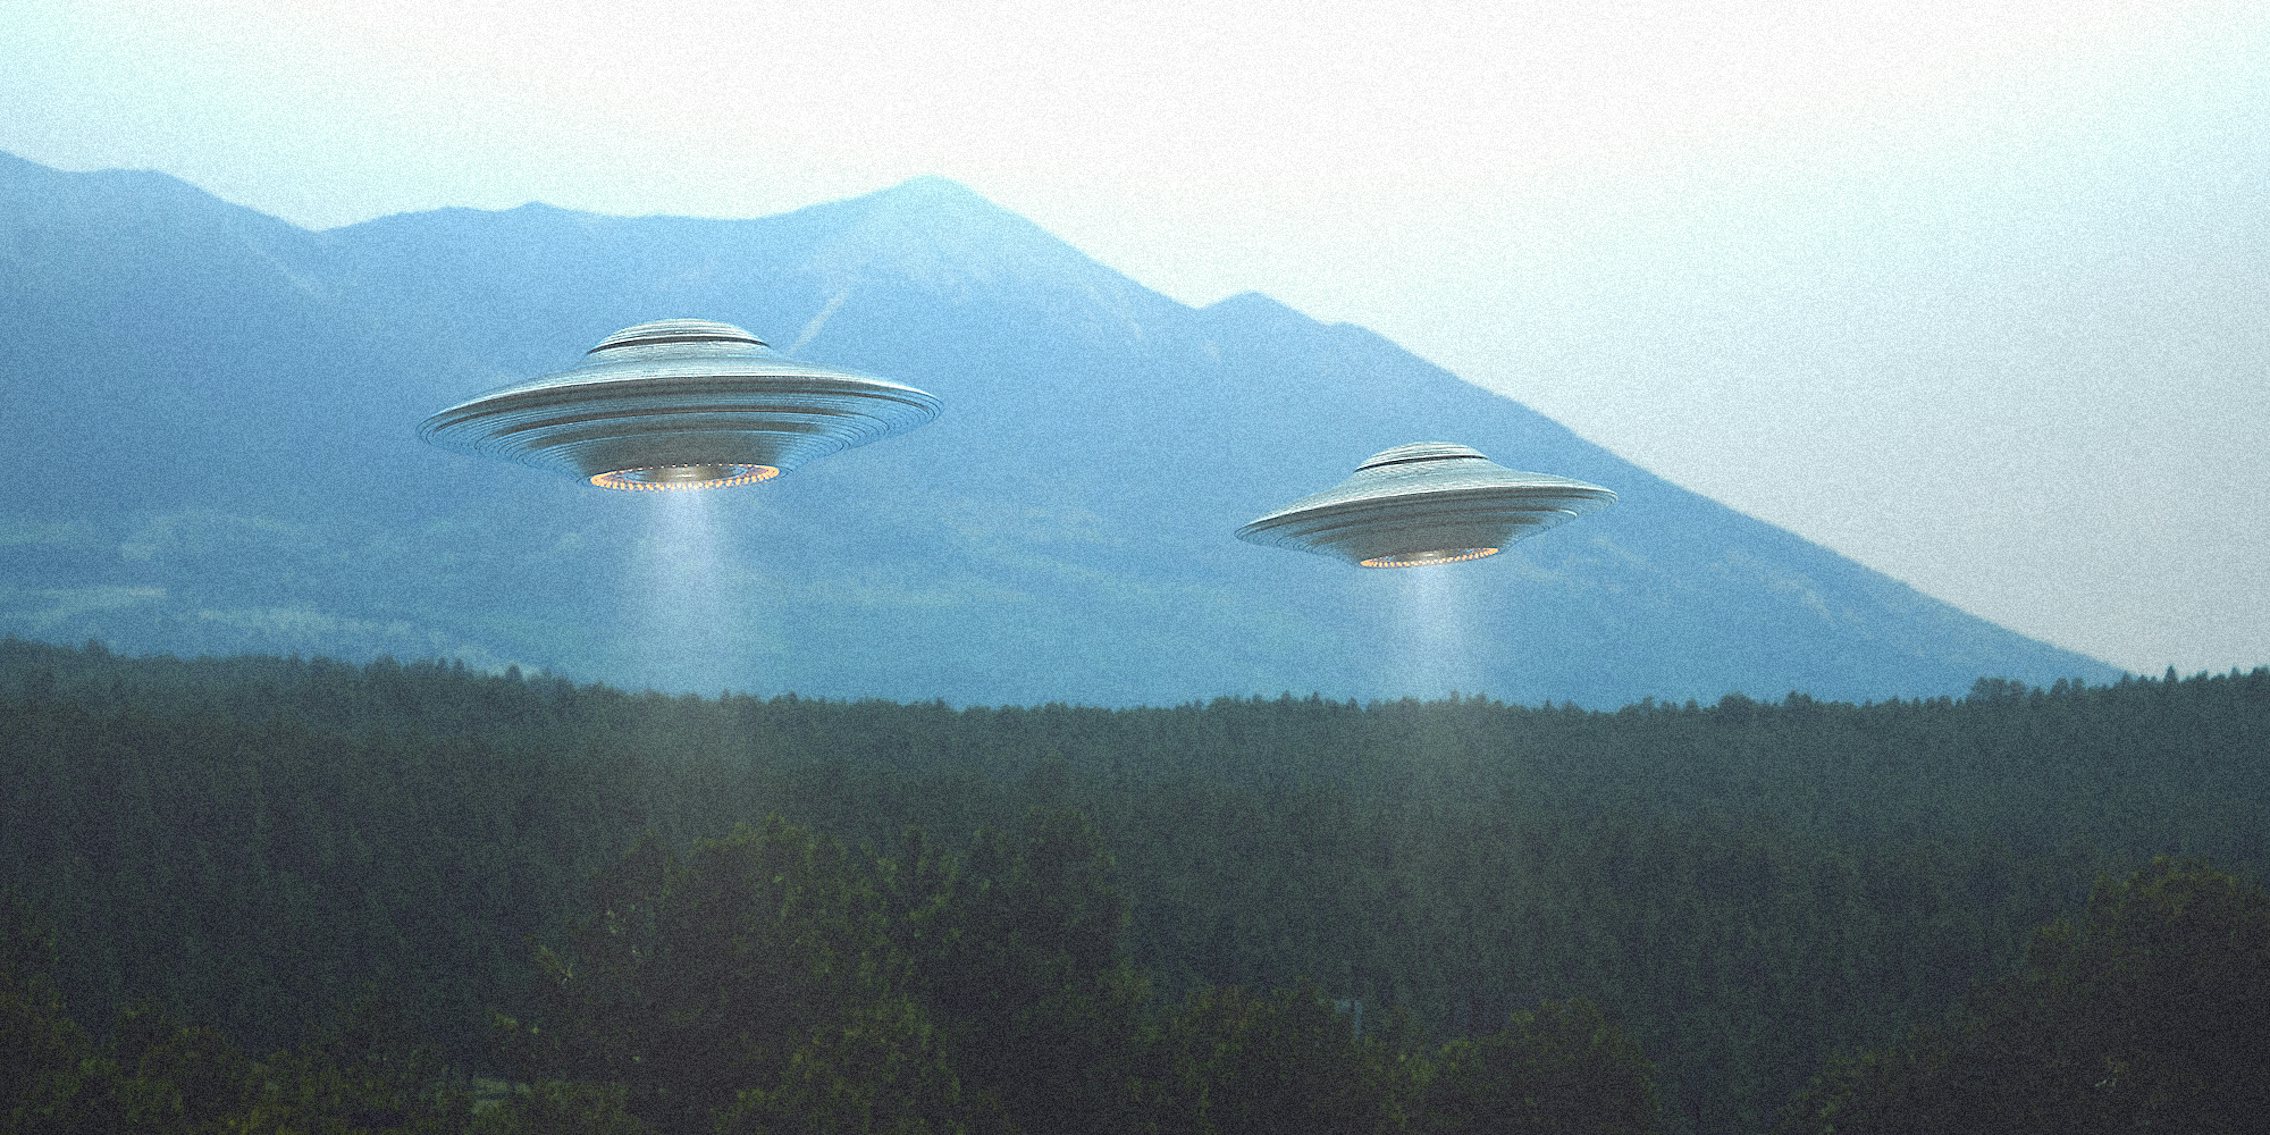 Two UFO ships above forest setting.